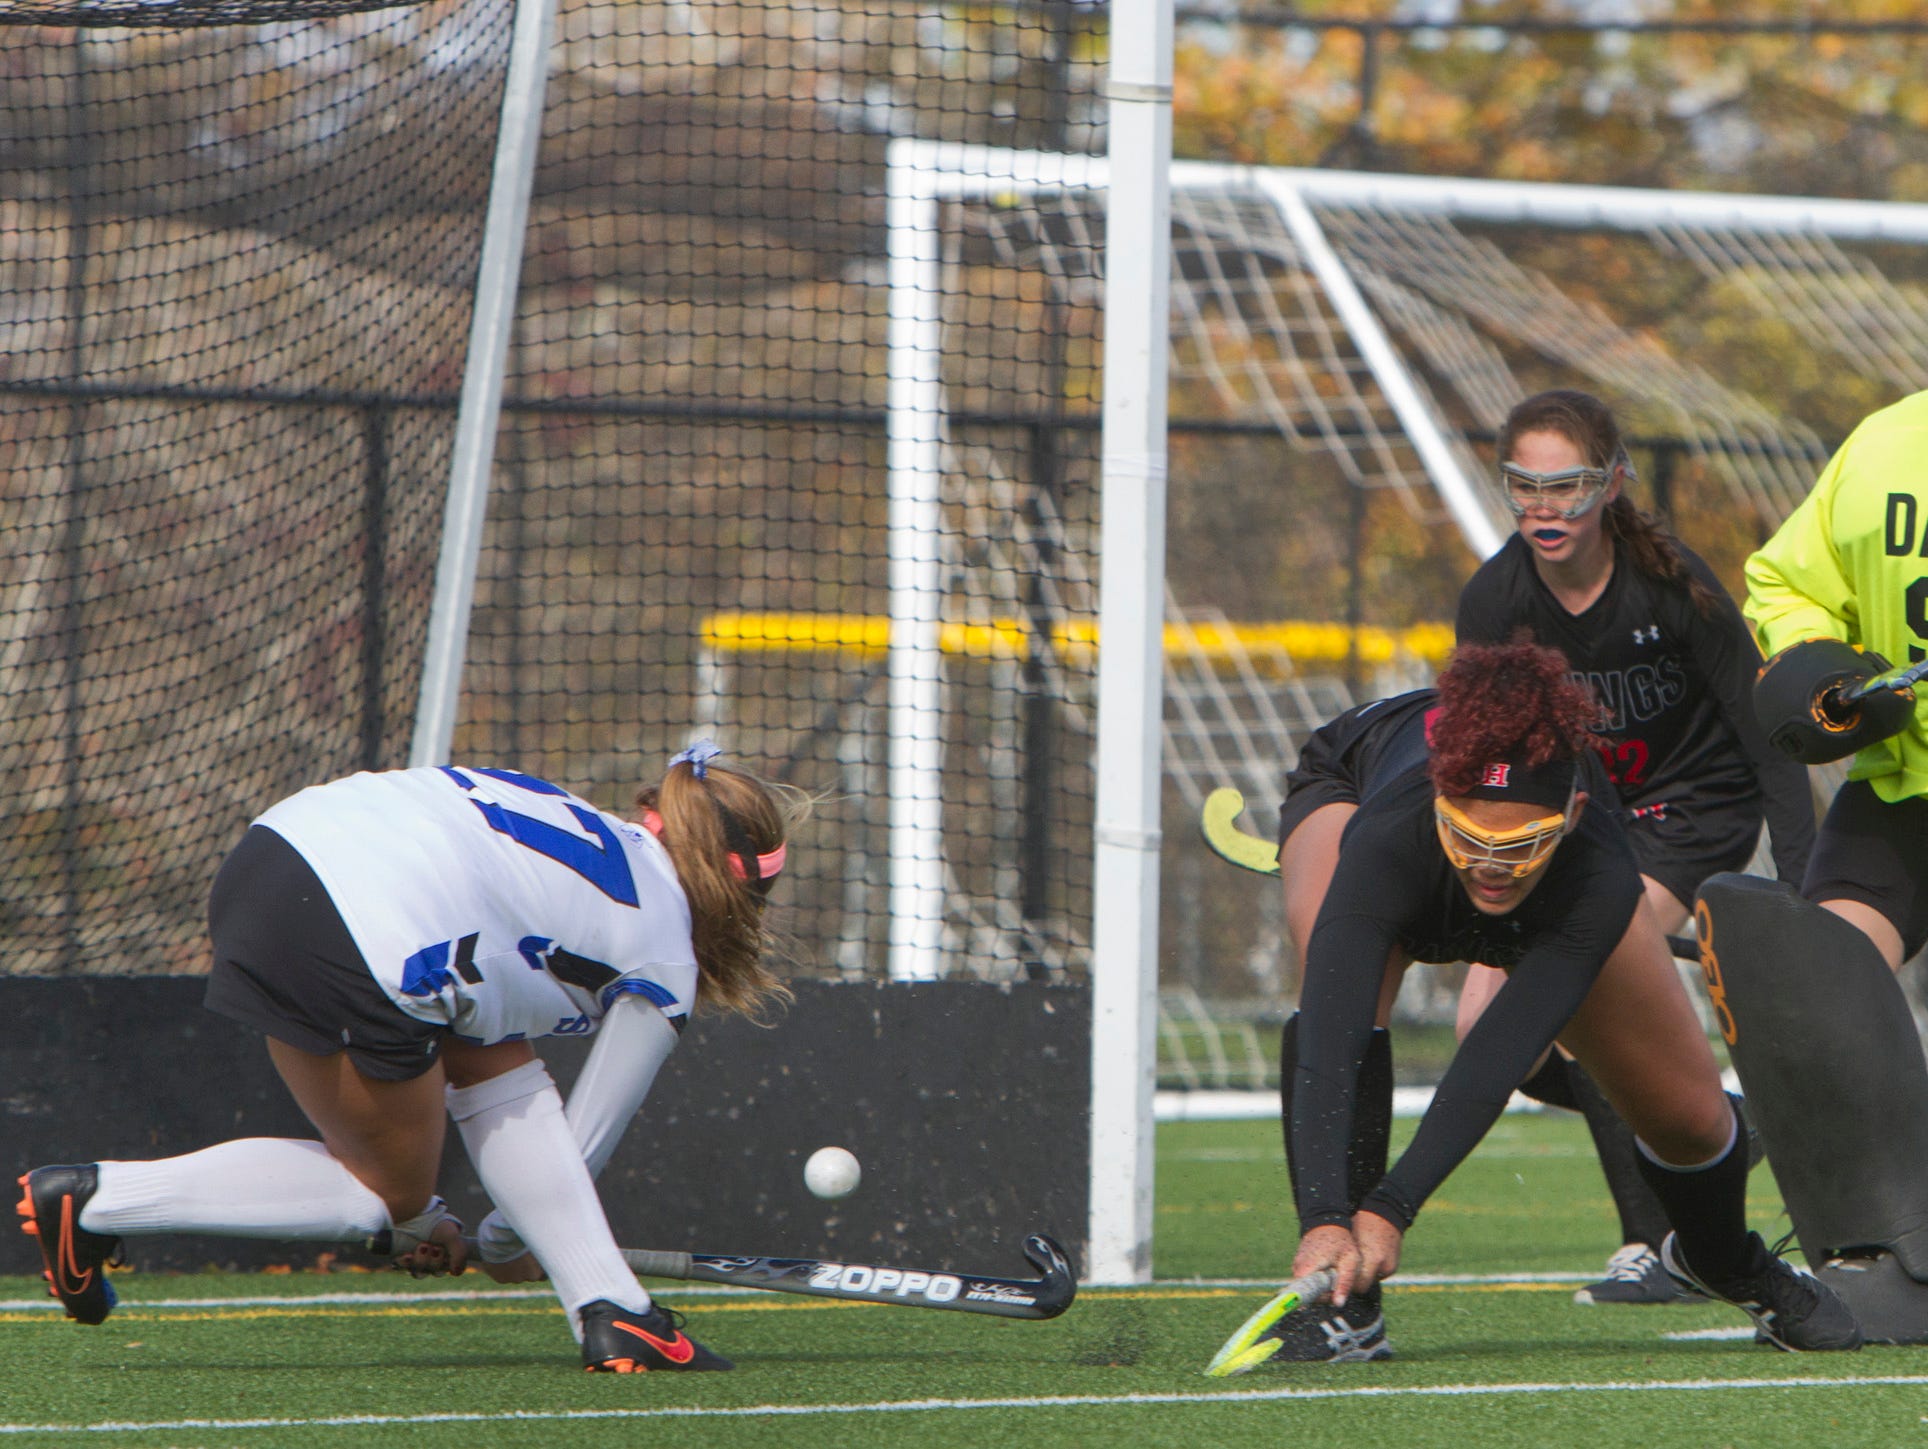 Shore Regional's Abby Kopec pops in a shot for her team's second goal in their 3-0 win over Haddonefield.Shore Regional defeats Haddonfield 3-0 in NJSIAA Group I State Final in Bordentown, NJ on November 14, 2015